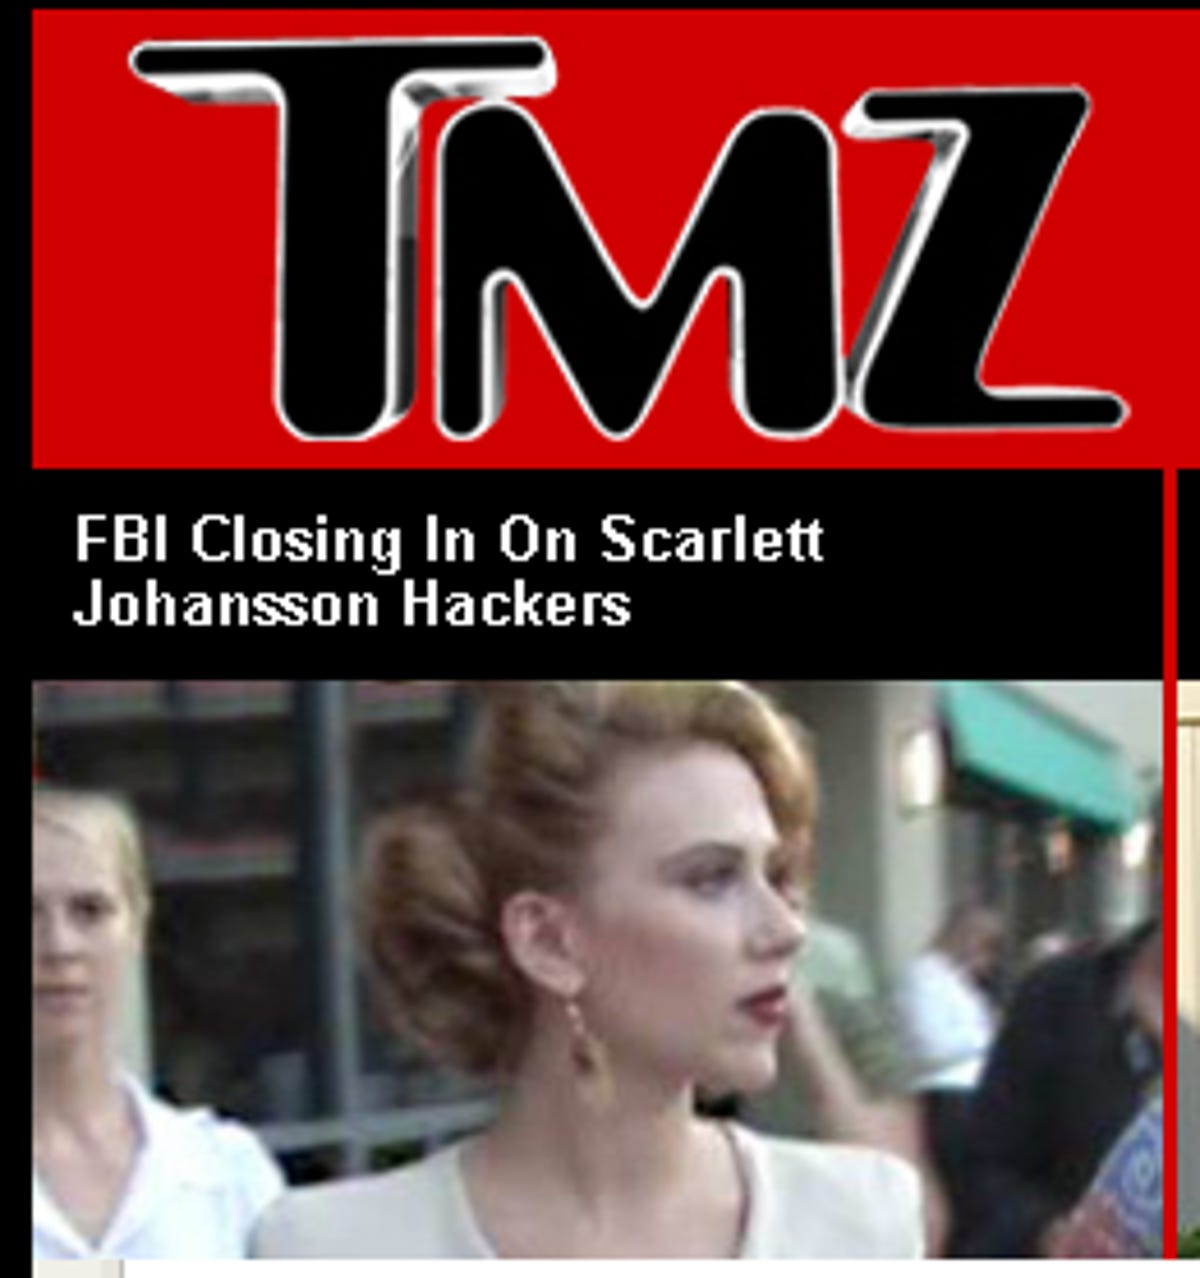 Gossip site TMZ has been covering celebrity reports of hacking for months.